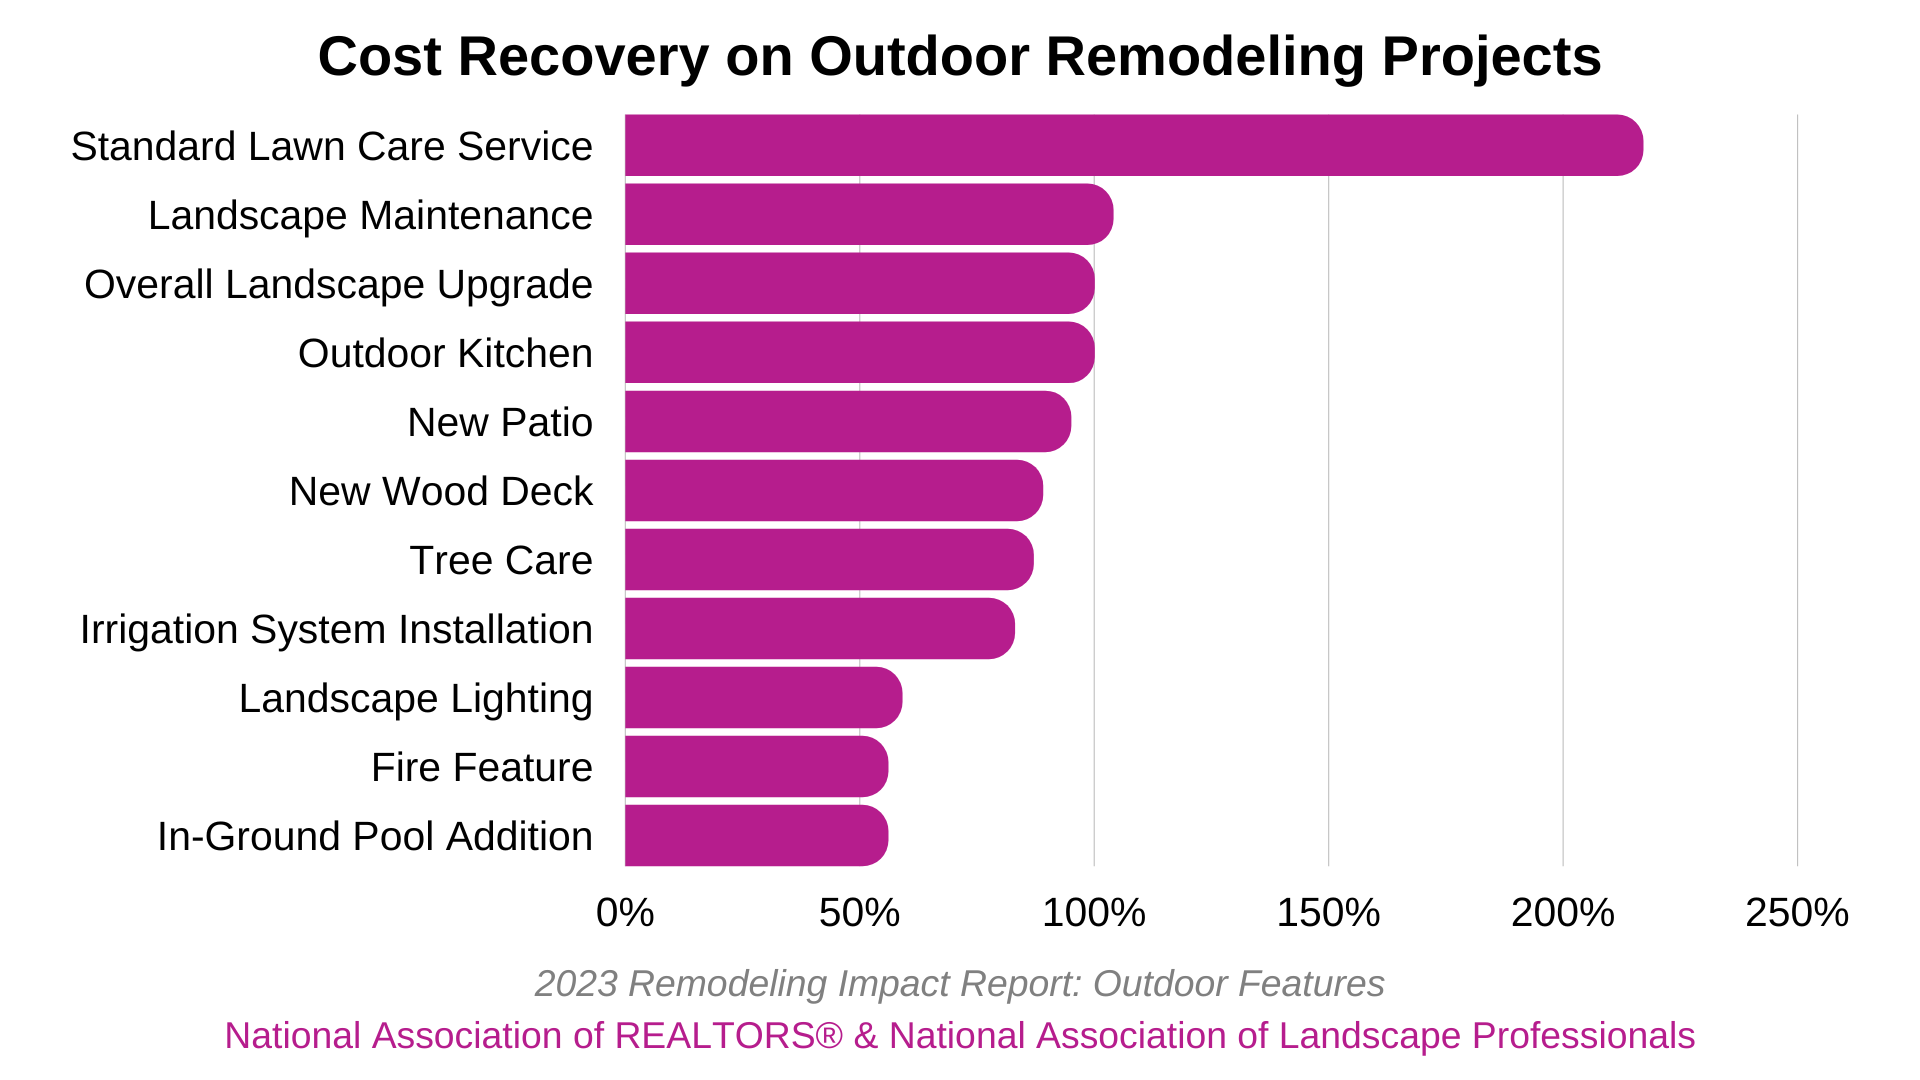 Cost Recovery on Outdoor Remodeling Projects National Association of Realtors National Association of Landscape Professionals